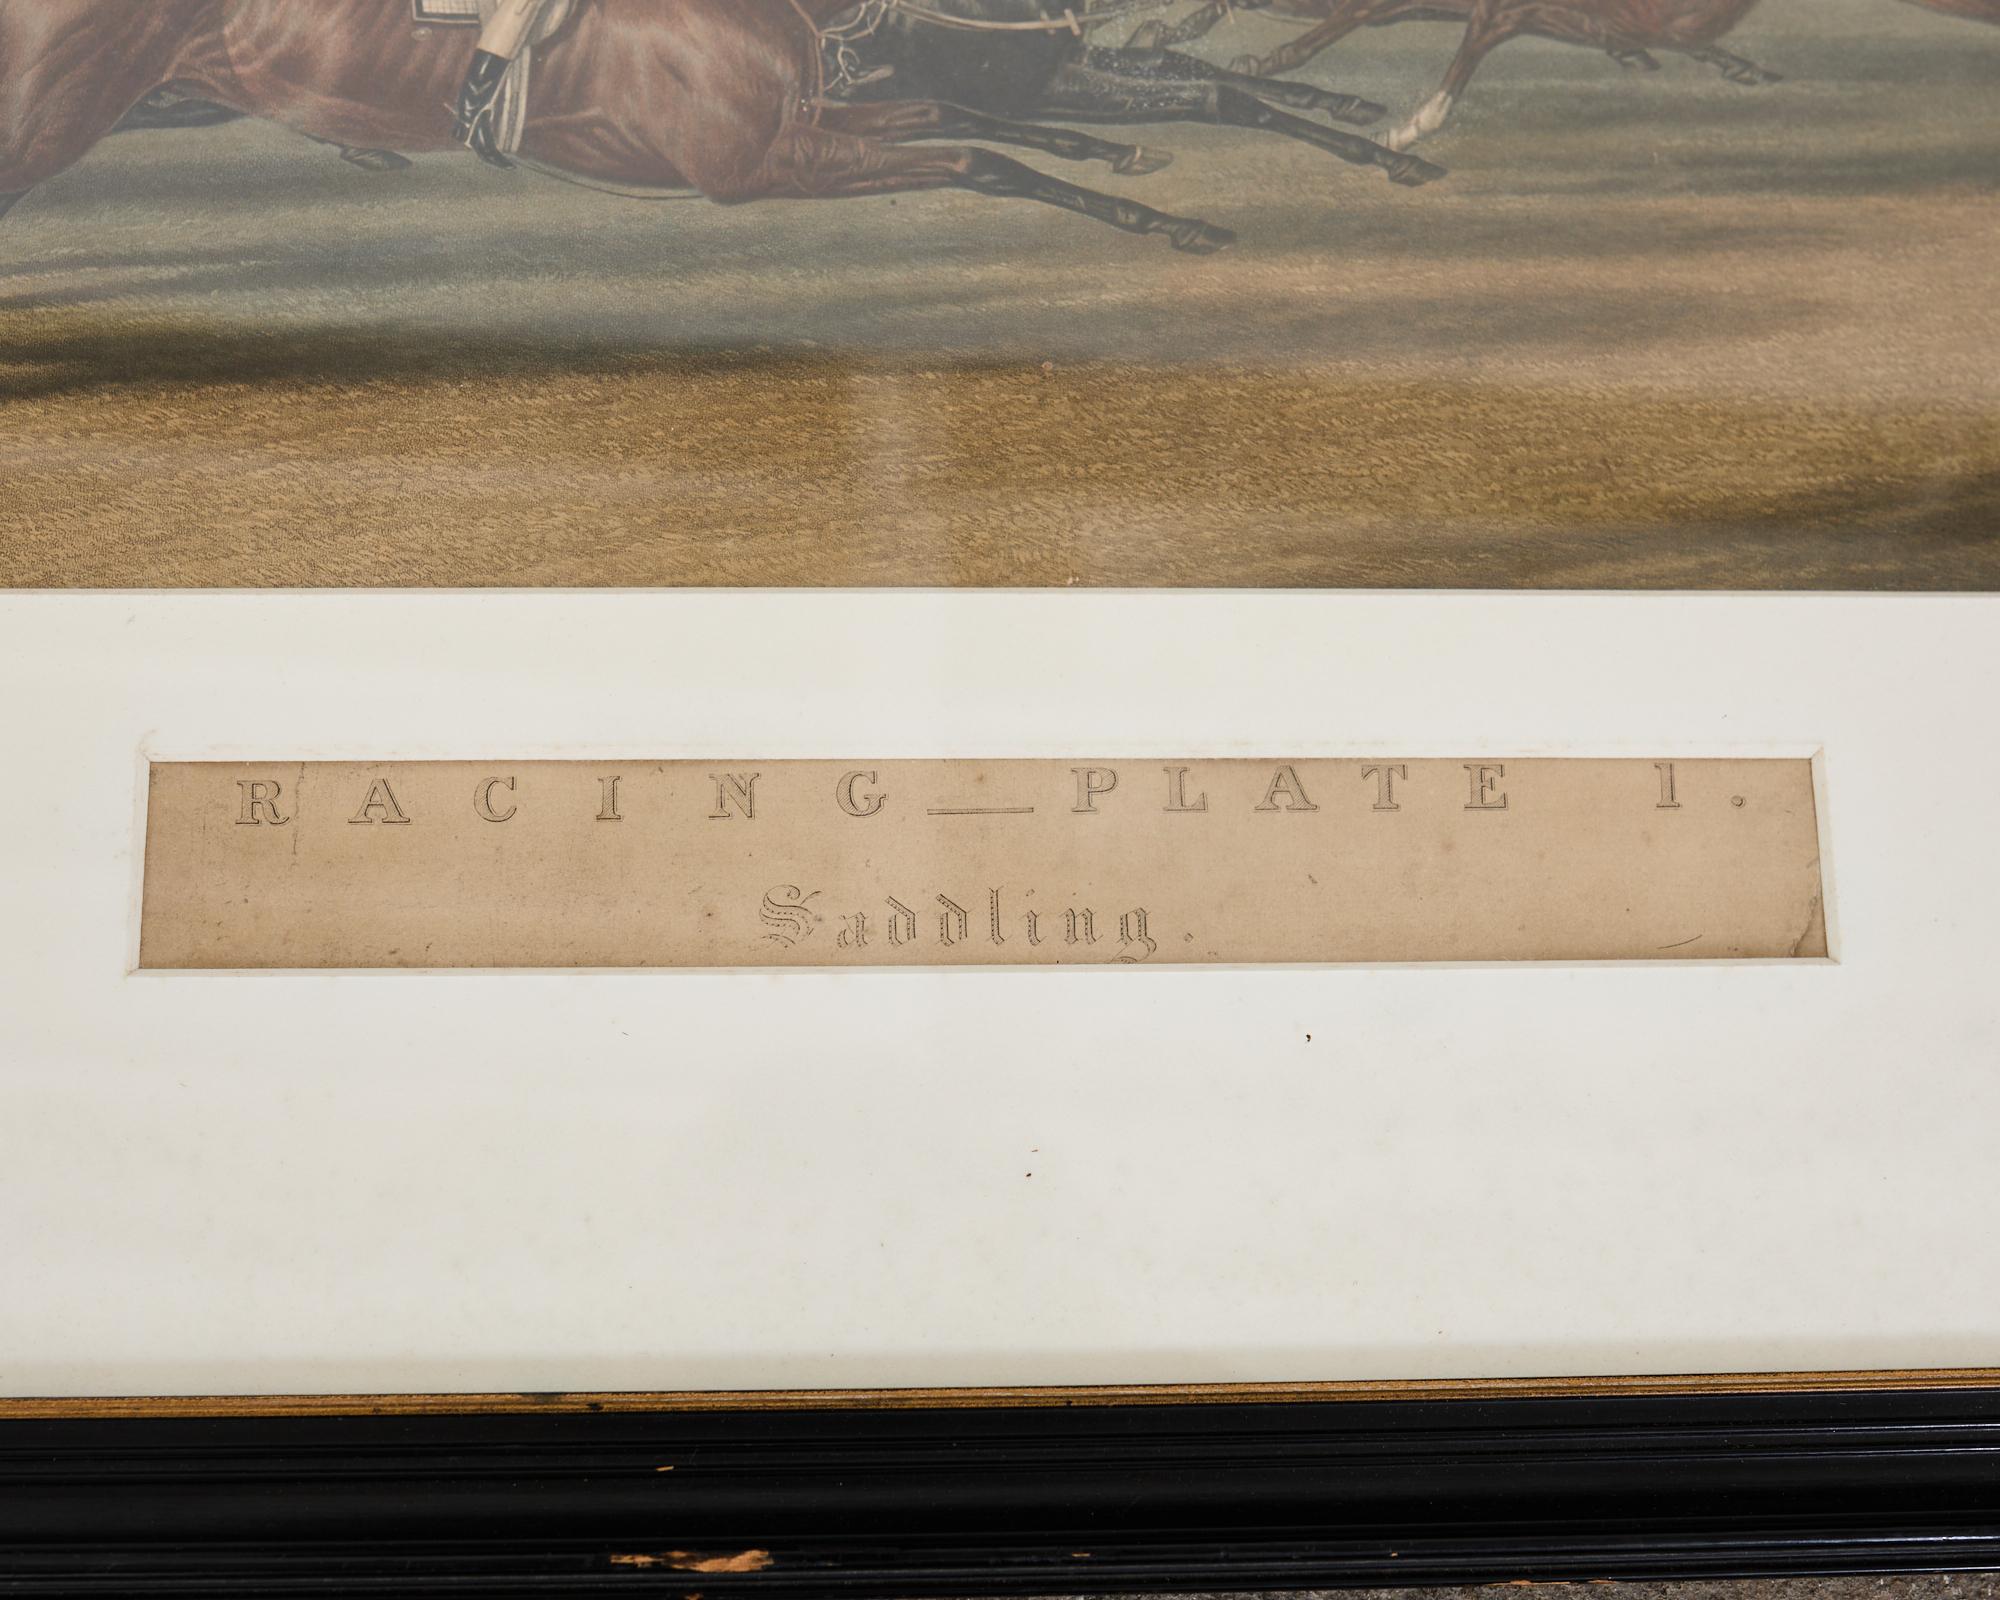 19th Century Set of Four Fores' National Sports Equestrian Prints by Herring For Sale